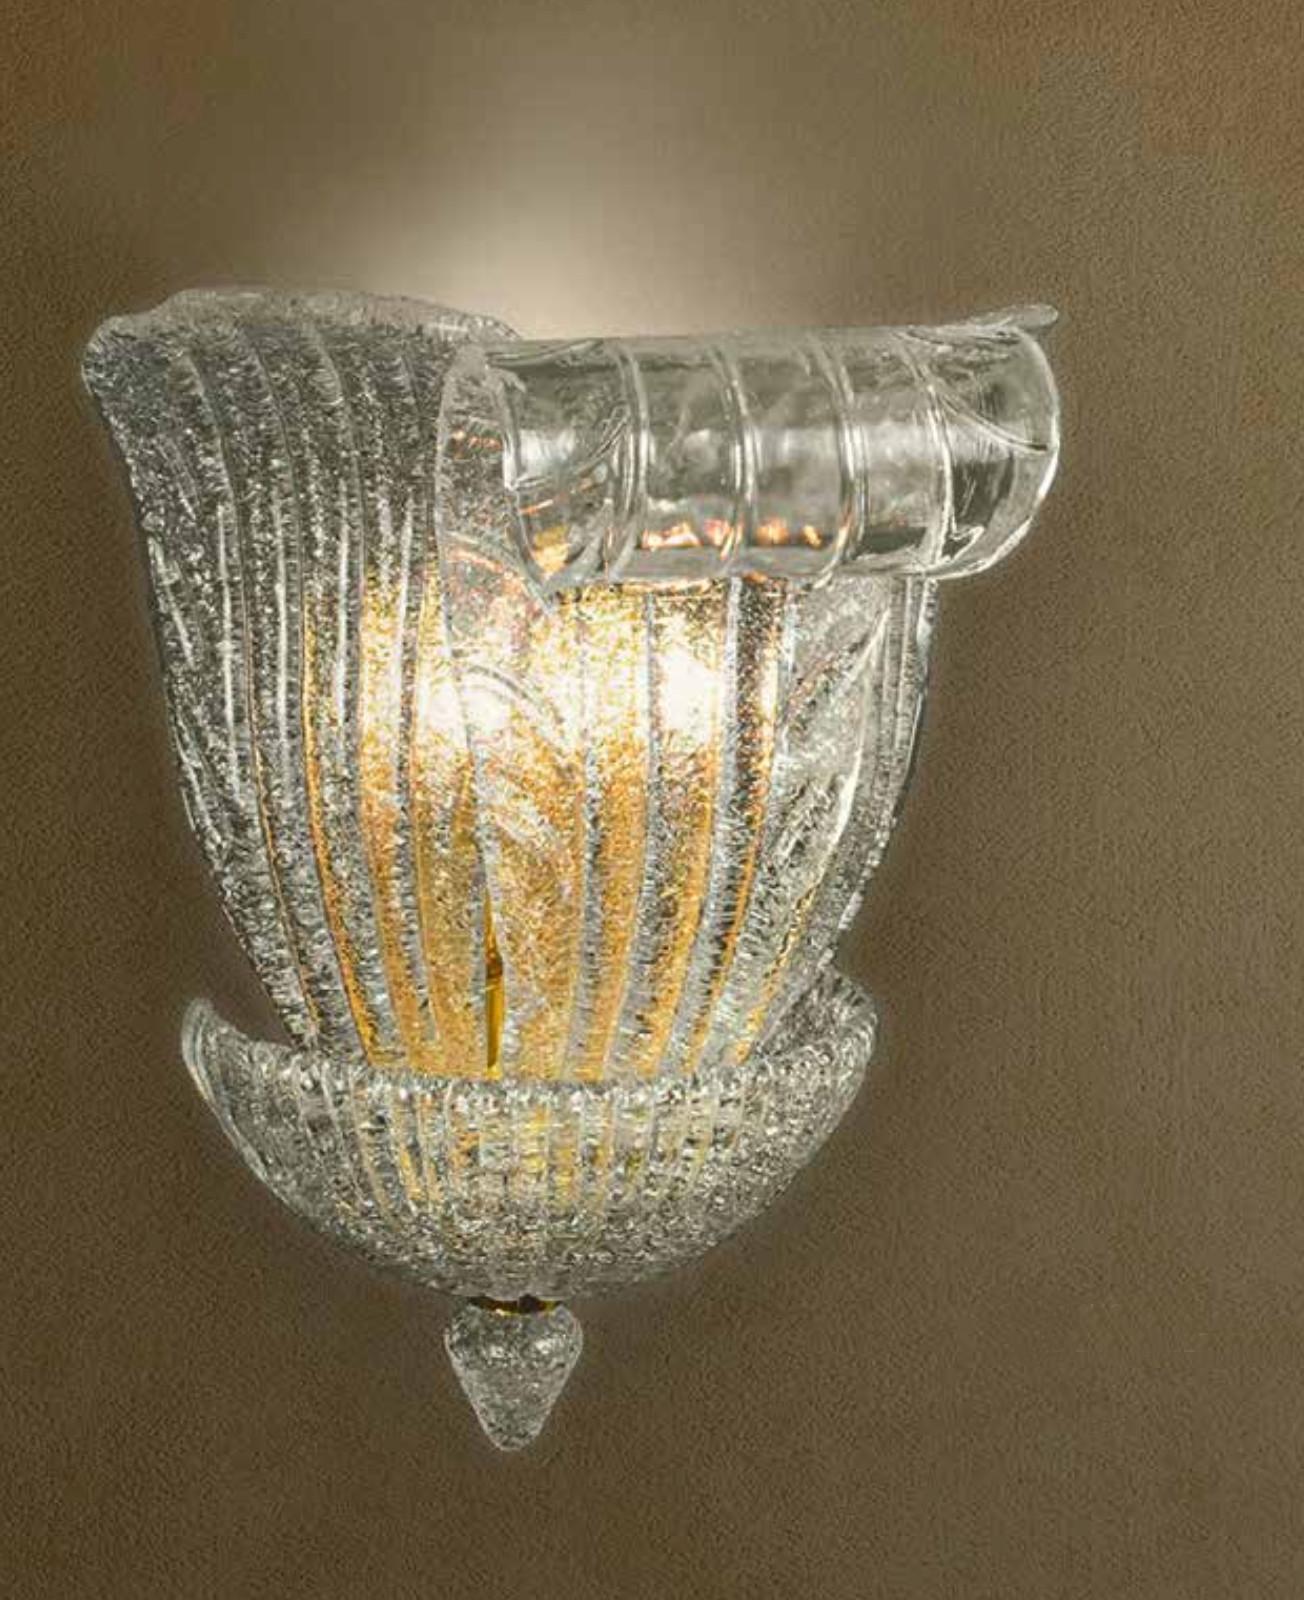 Italian wall light with clear Murano glass leaves hand blown in Graniglia technique to produce granular textured effect, mounted on 24 K gold plated finish metal frame / Made in Italy in the style of Barovier e Toso
Measures: width 10 inches, height